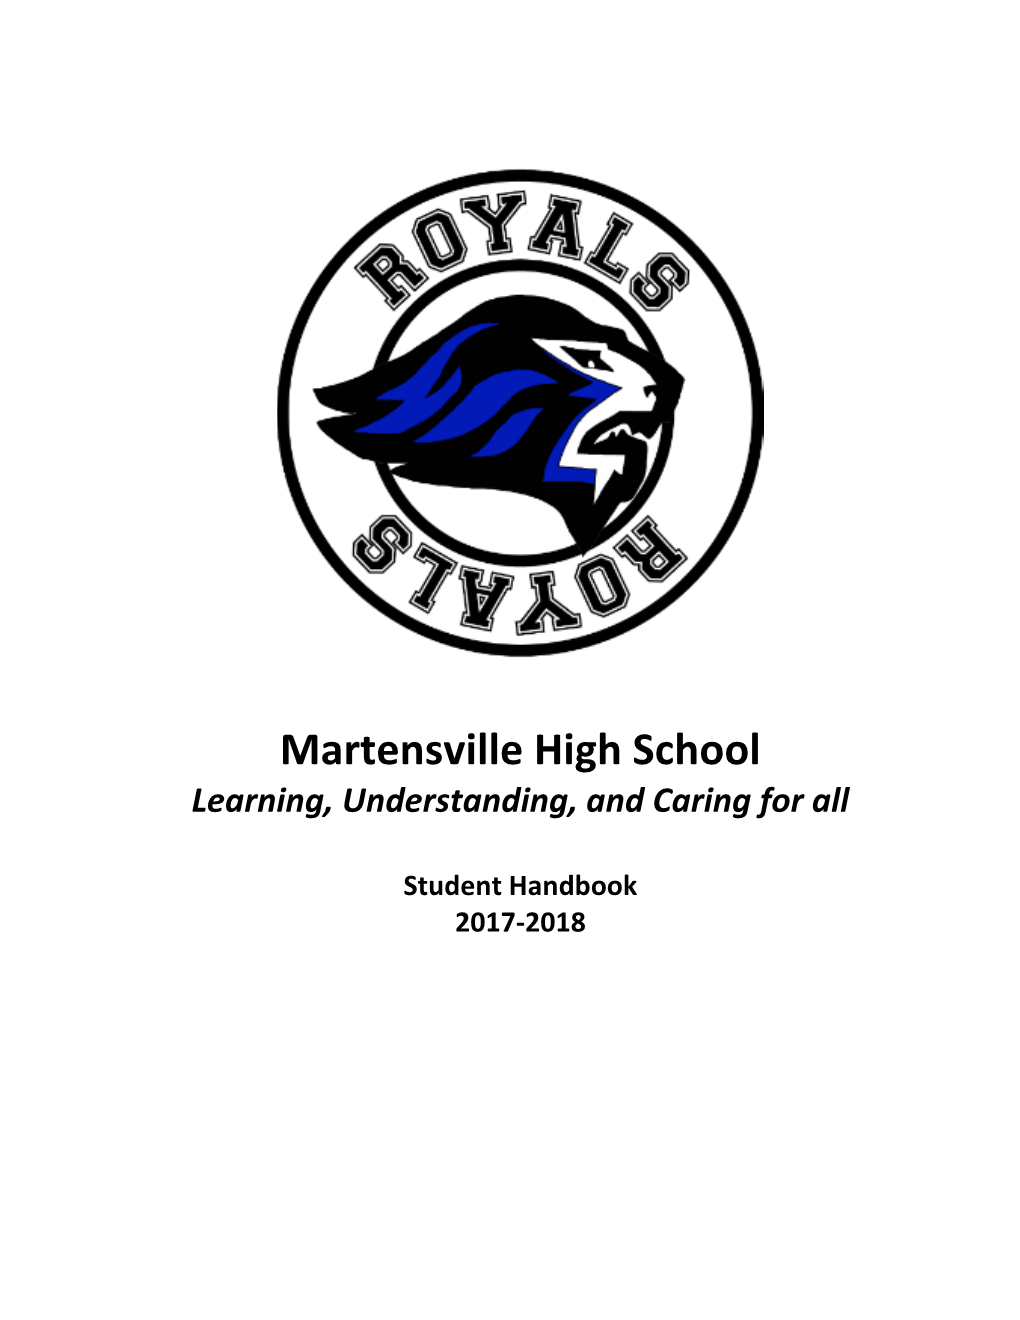 Martensville High School Learning, Understanding, and Caring for All